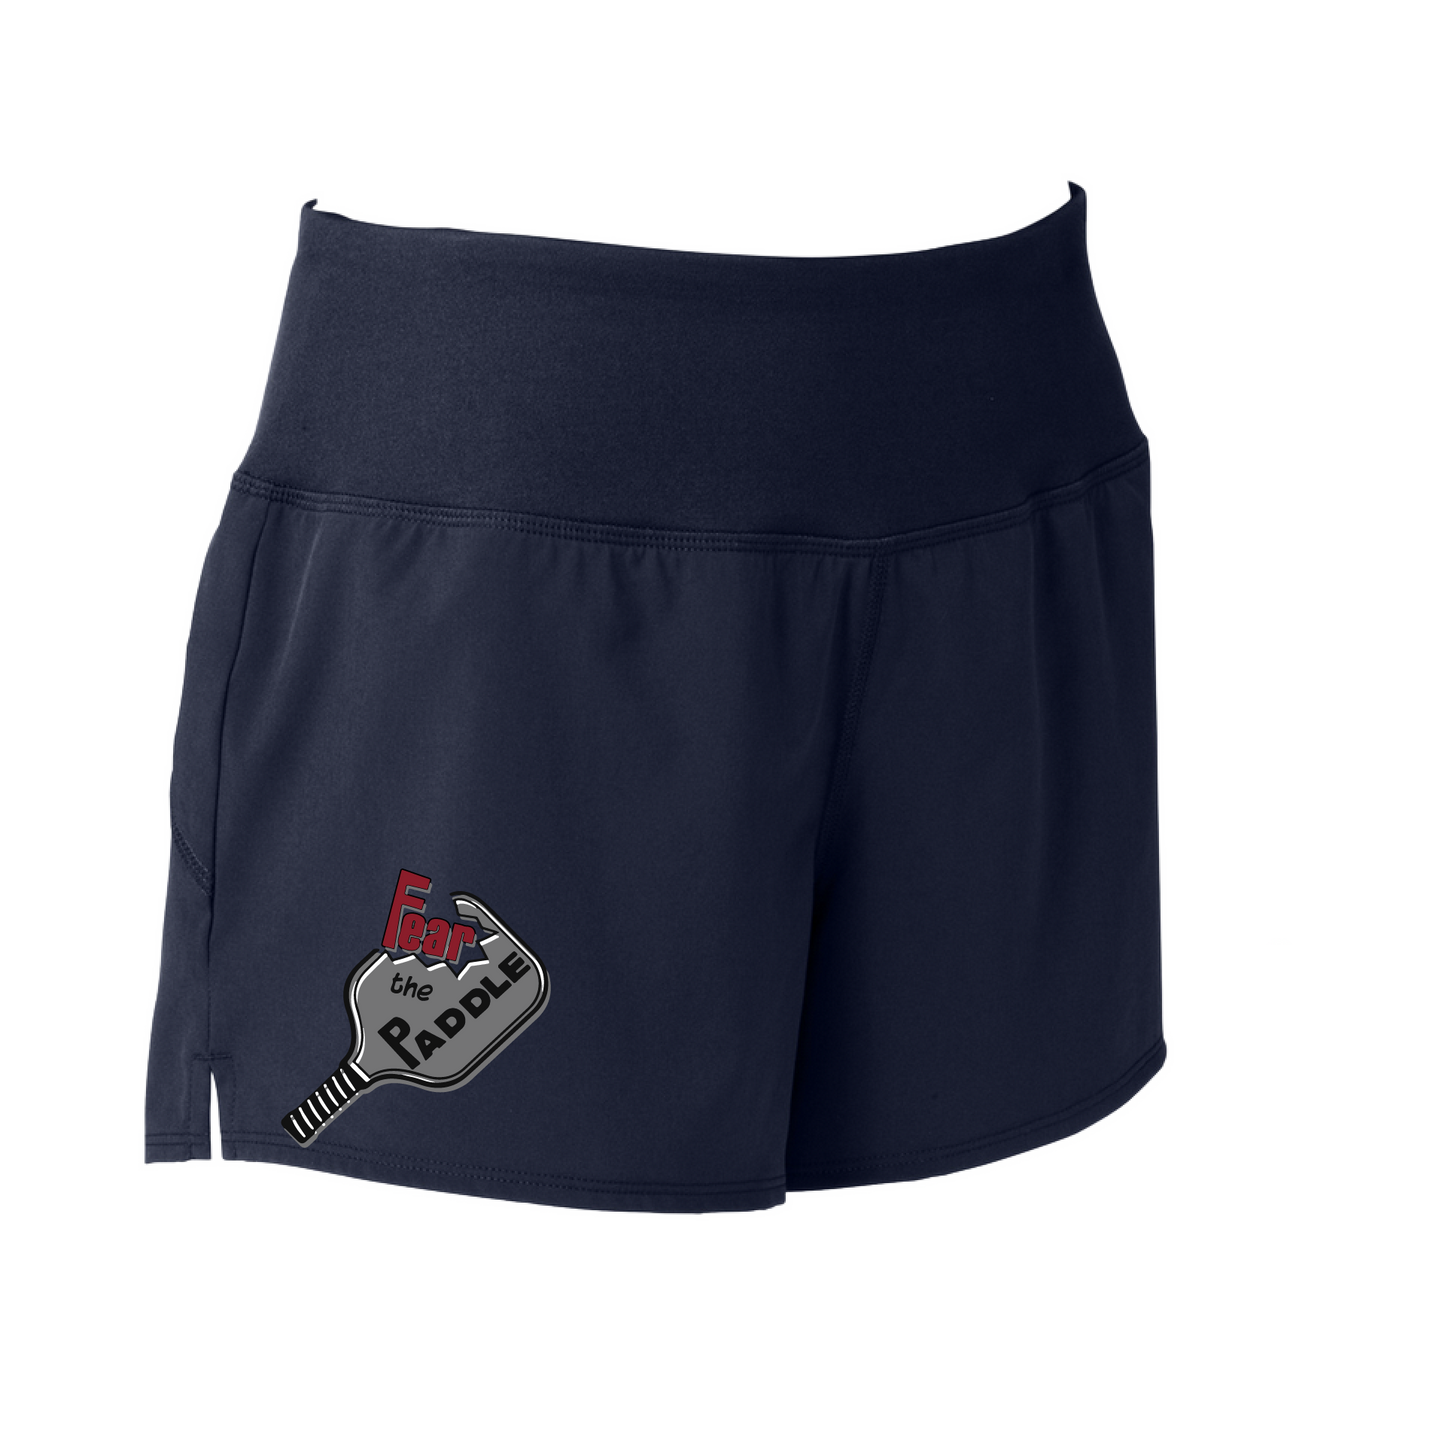 Shorts Pickleball Design: Fear the Paddle  Sport Tek women’s repeat shorts come with built-in cell phone pocket on the exterior of the waistband. You can also feel secure knowing that no matter how strenuous the exercise, the shorts will remain in place (it won’t ride up!). These shorts are extremely versatile and trendy. Transition from the Pickleball court to running errands smoothly.